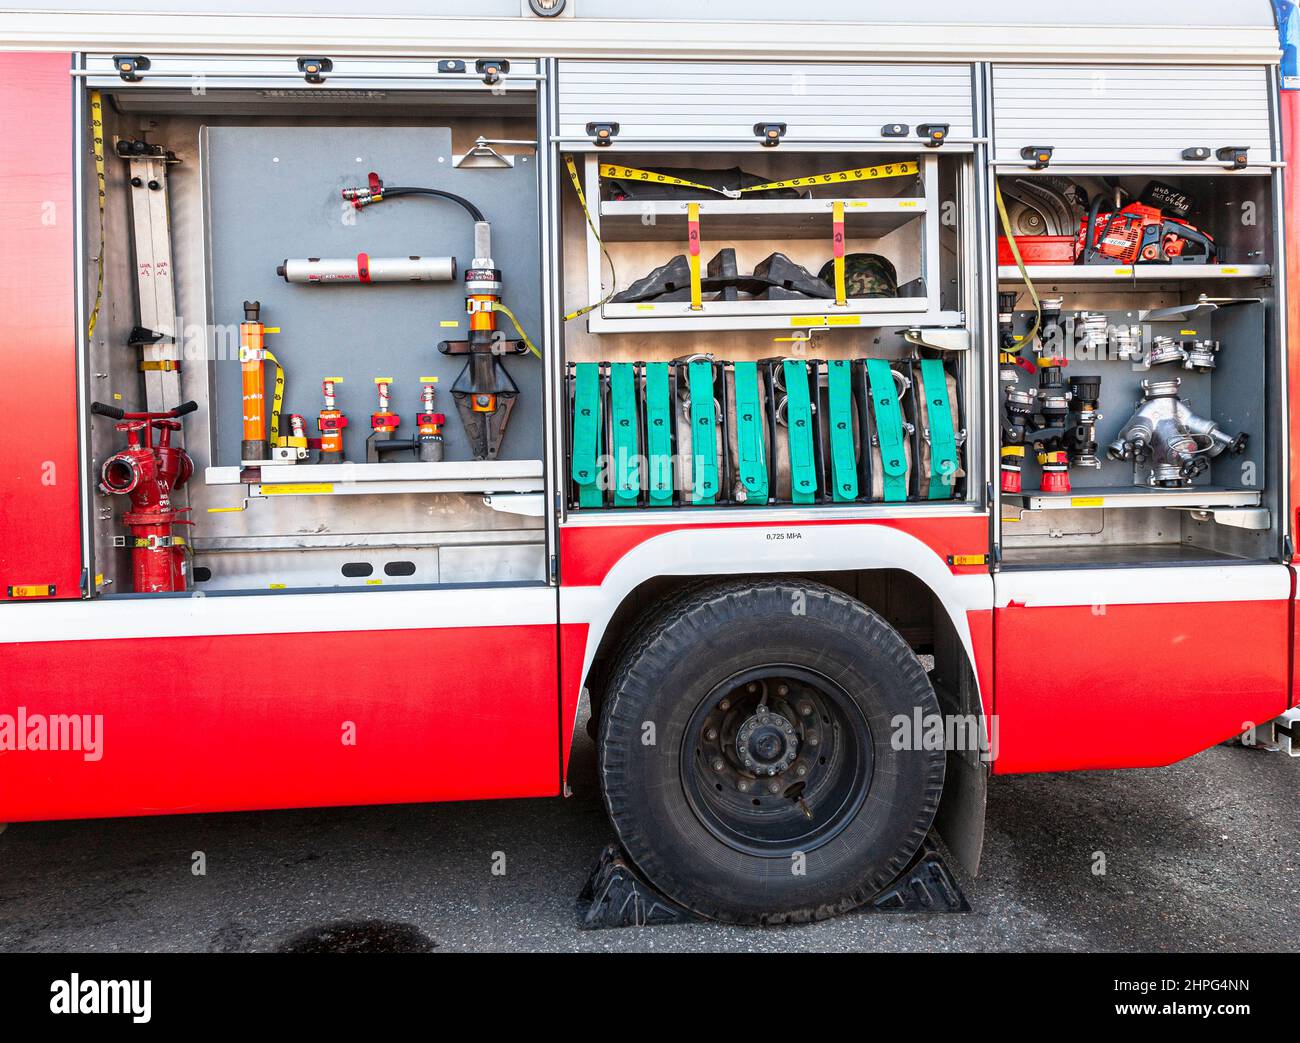 Samara, Russia - May 7, 2019: Equipment for fire extinguisher. Fire and rescue equipment in a fire truck Stock Photo